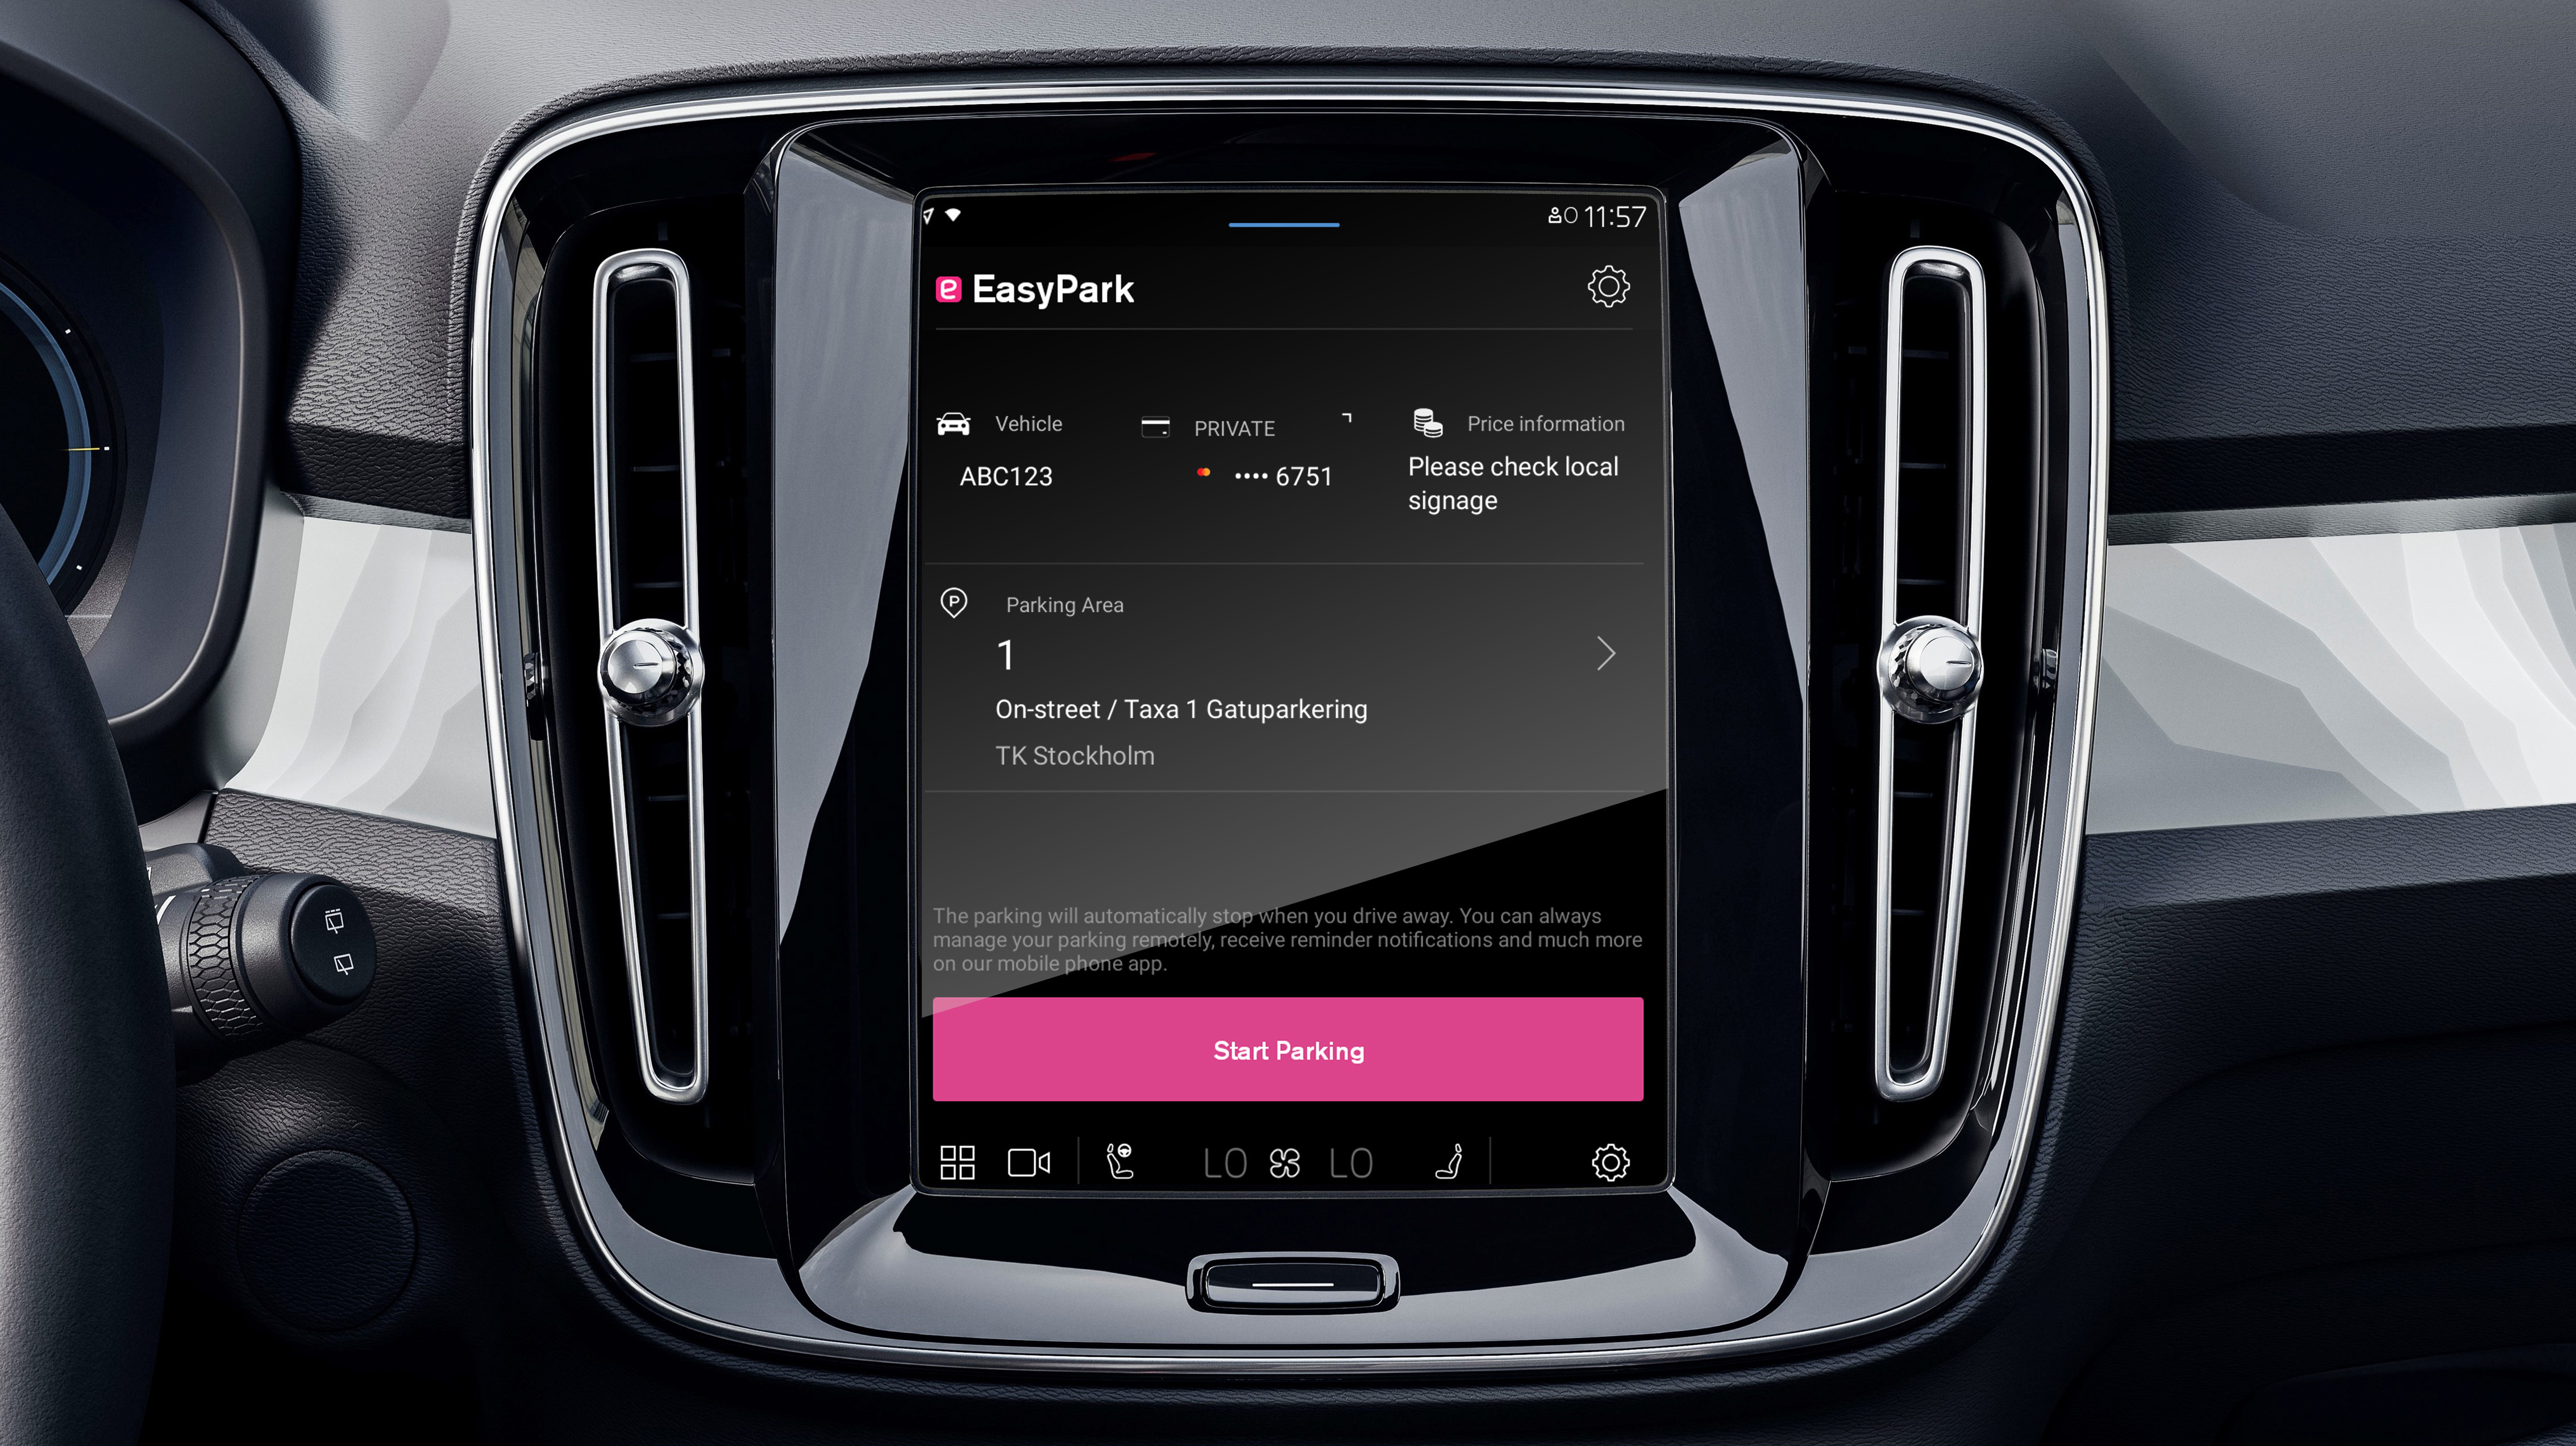 The new feature seamlessly integrates EasyPark’s app into Volvo’s Android Automotive environment 